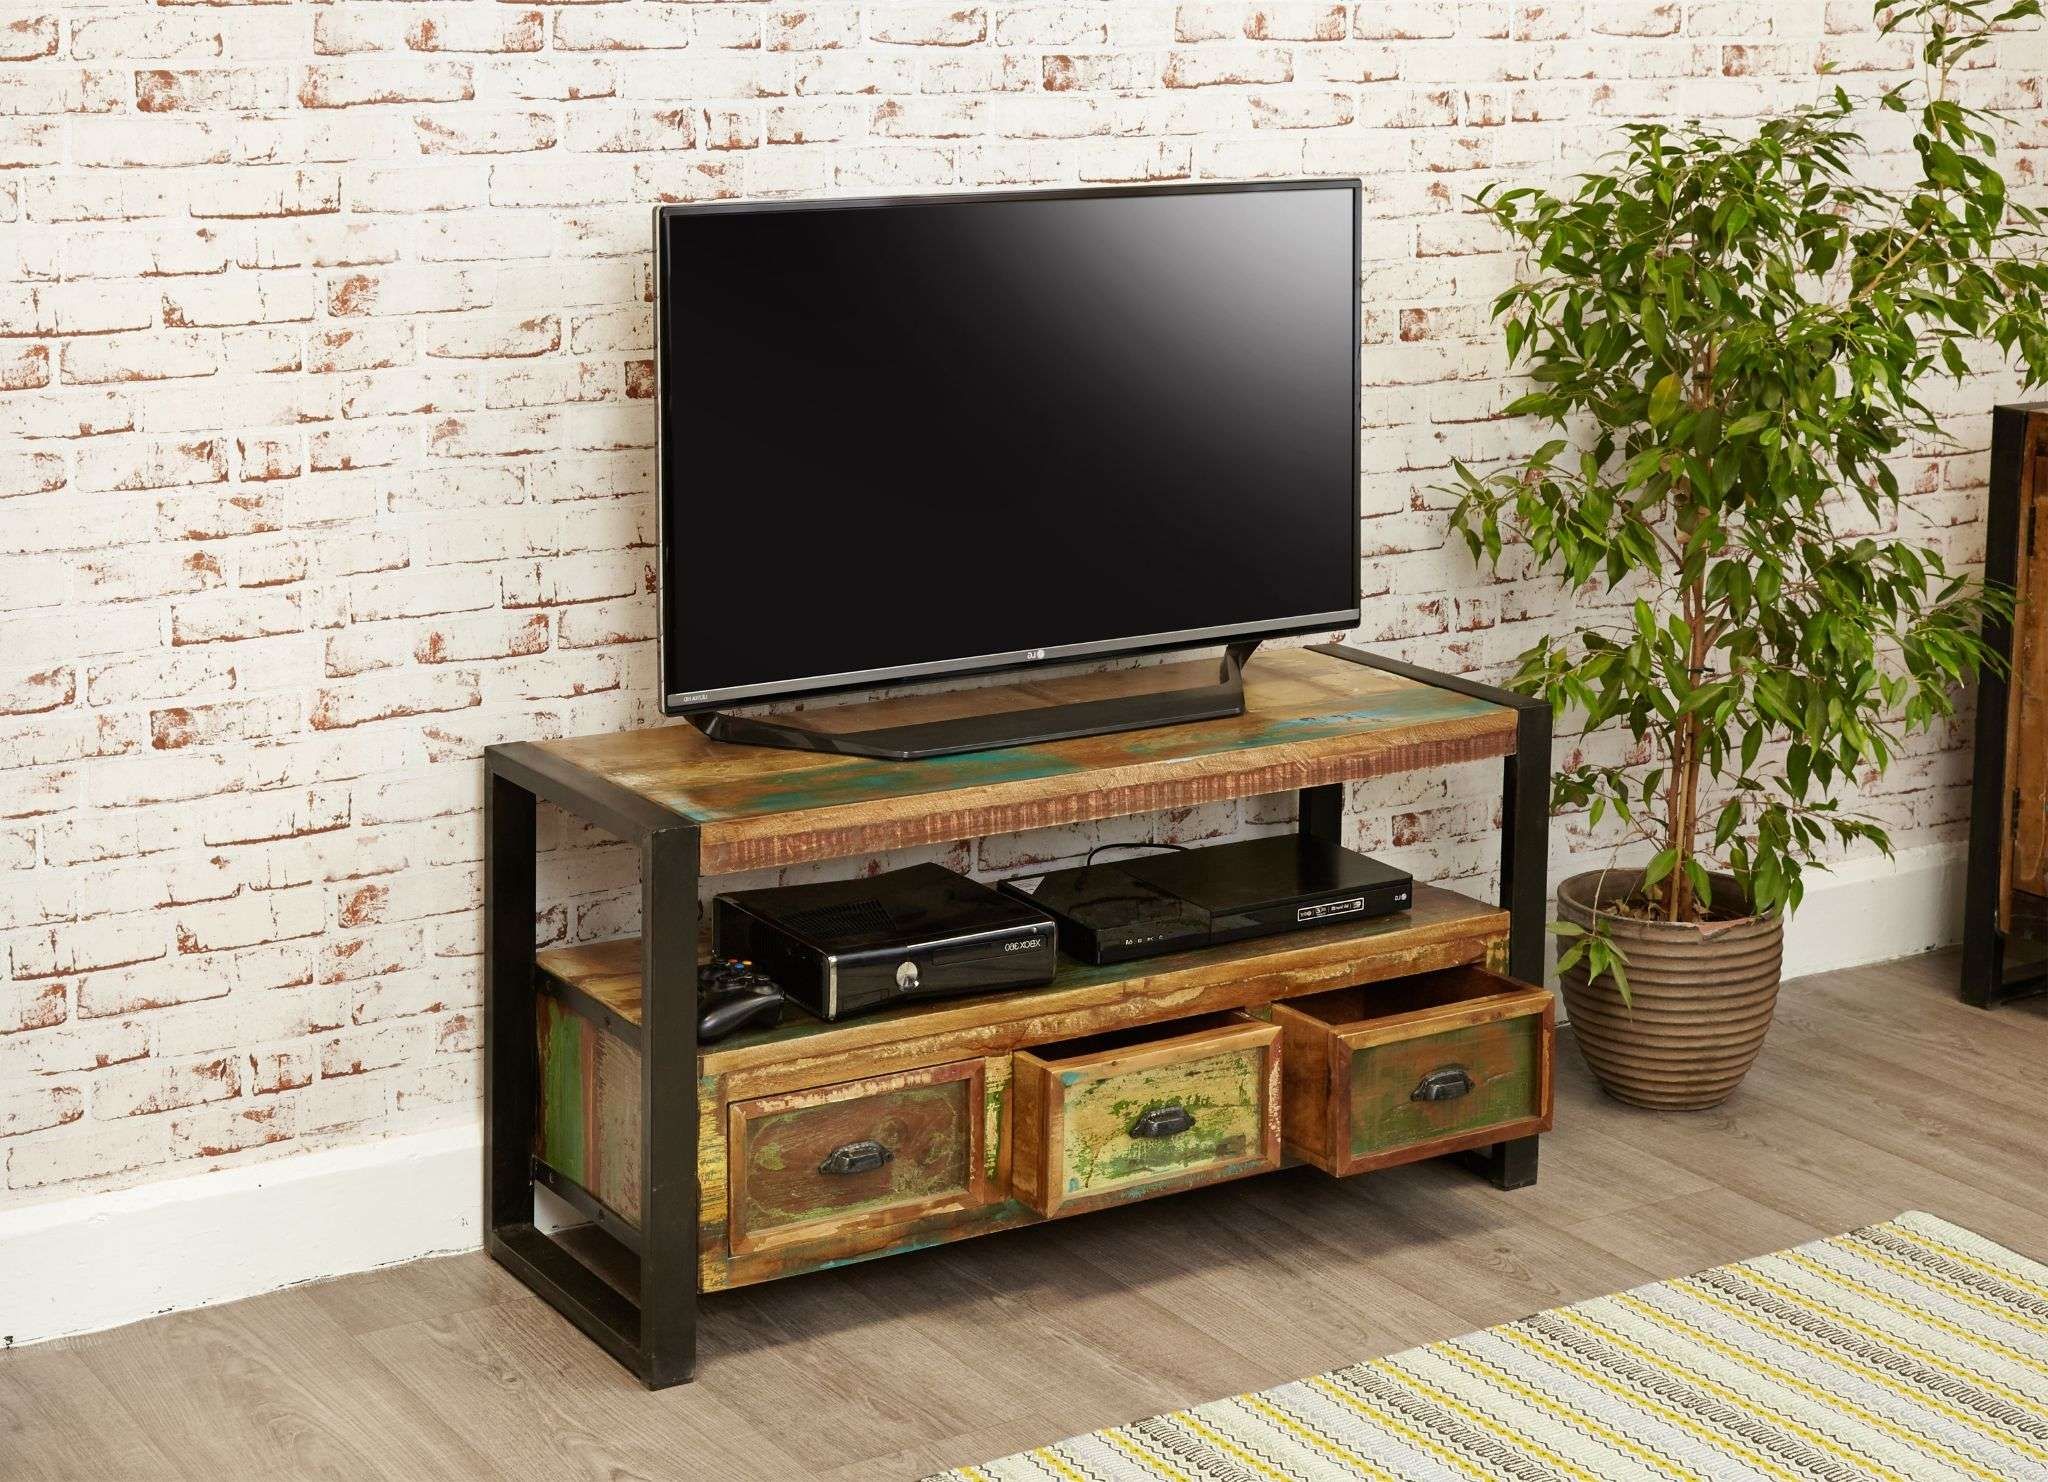 Rustic Industrial Tv Unit | See More Tv Units At Big Blu Inside Industrial Tv Cabinets (View 17 of 20)